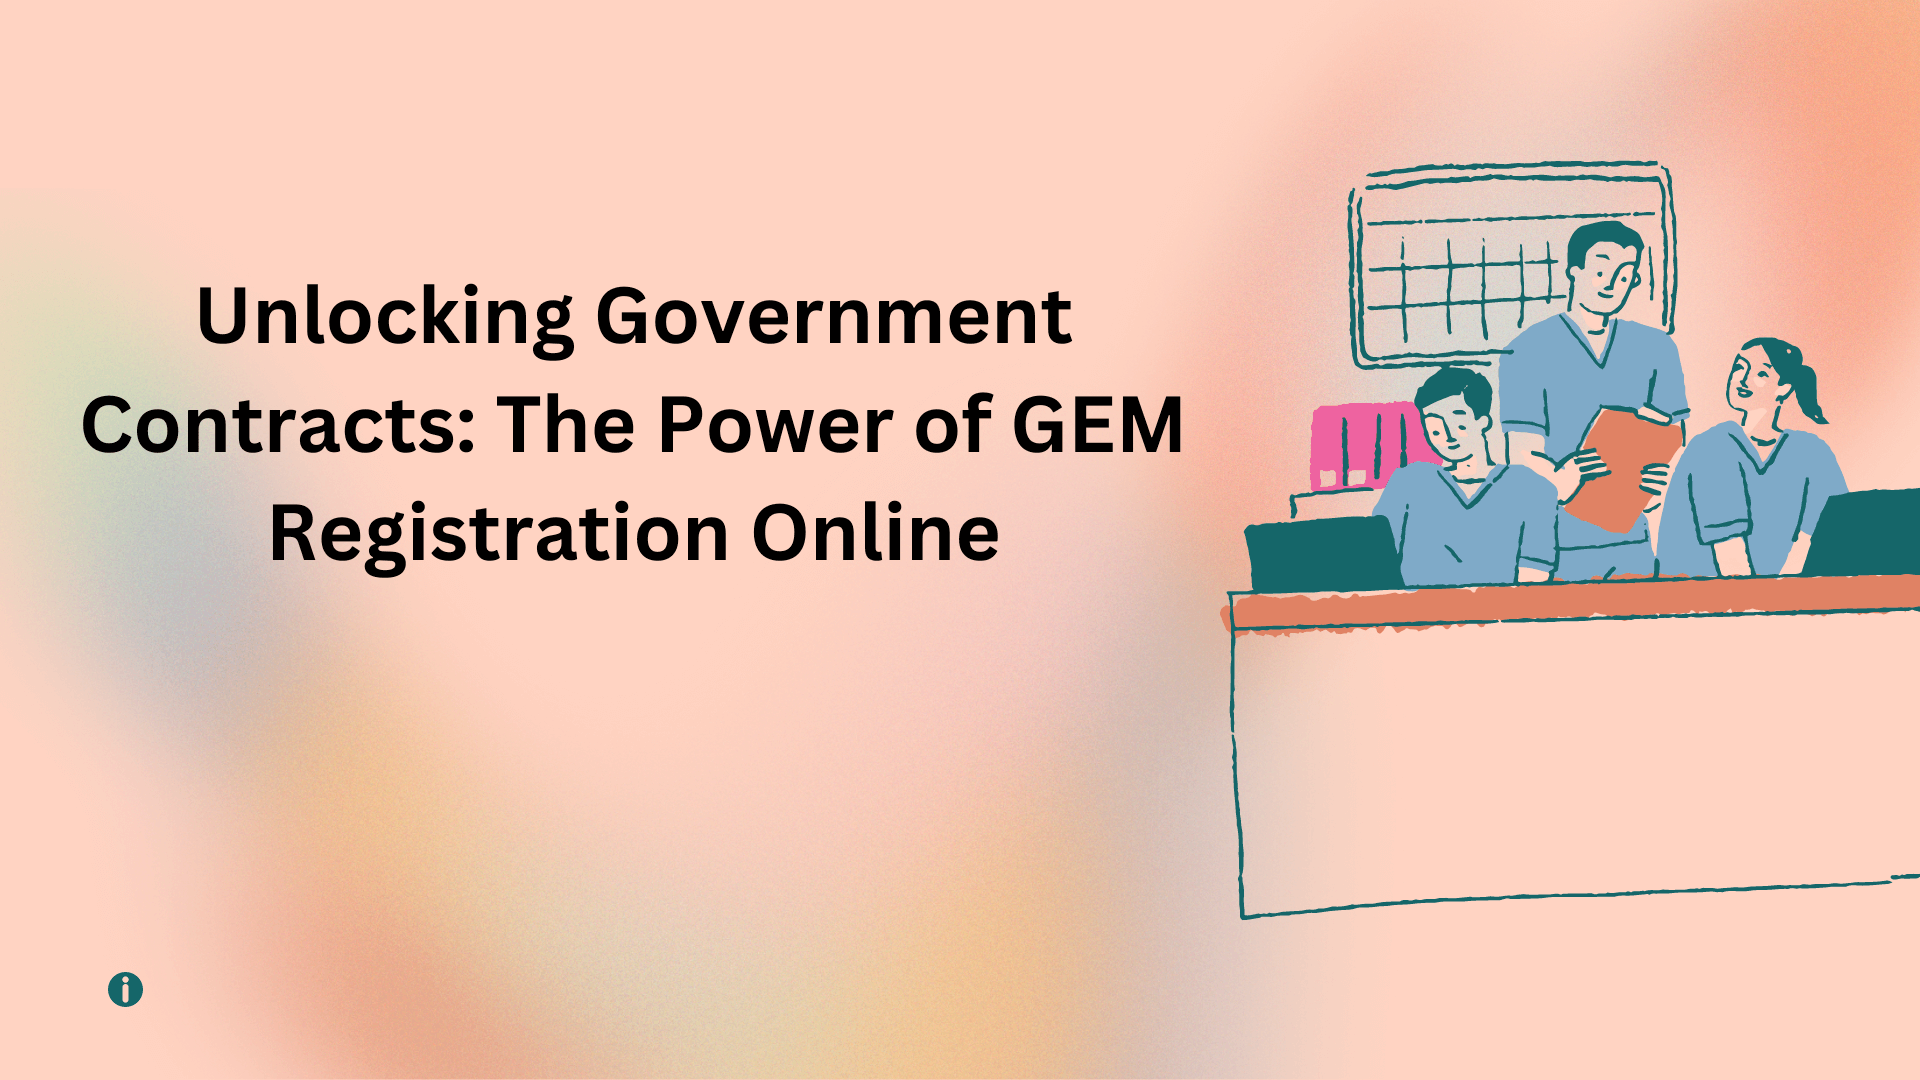 Unlocking Government Contracts: The Power of GEM Registration Online